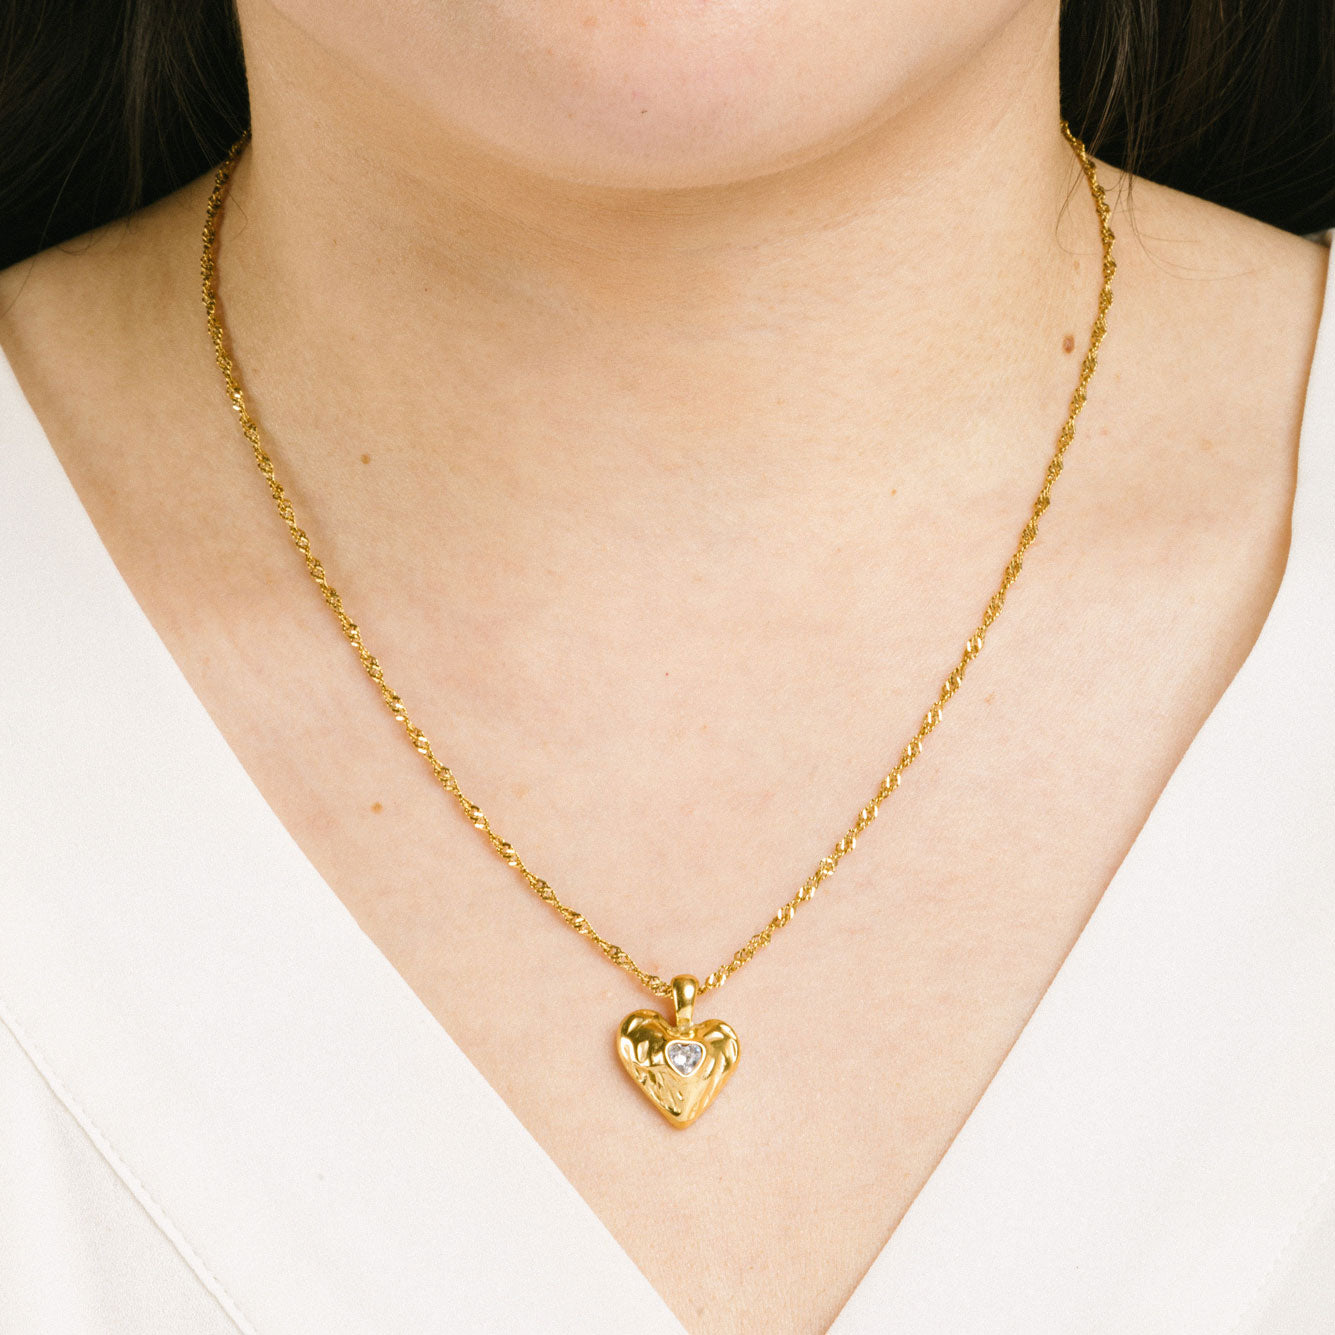 A model wearing the Textured Heart Pendant Necklace is crafted from 14K Gold Plated Stainless Steel with a Cubic Zirconia stone, and is non-tarnish, water resistant, and free from Lead, Nickel, and Cadmium. It is also adjustable and has only one necklace included.